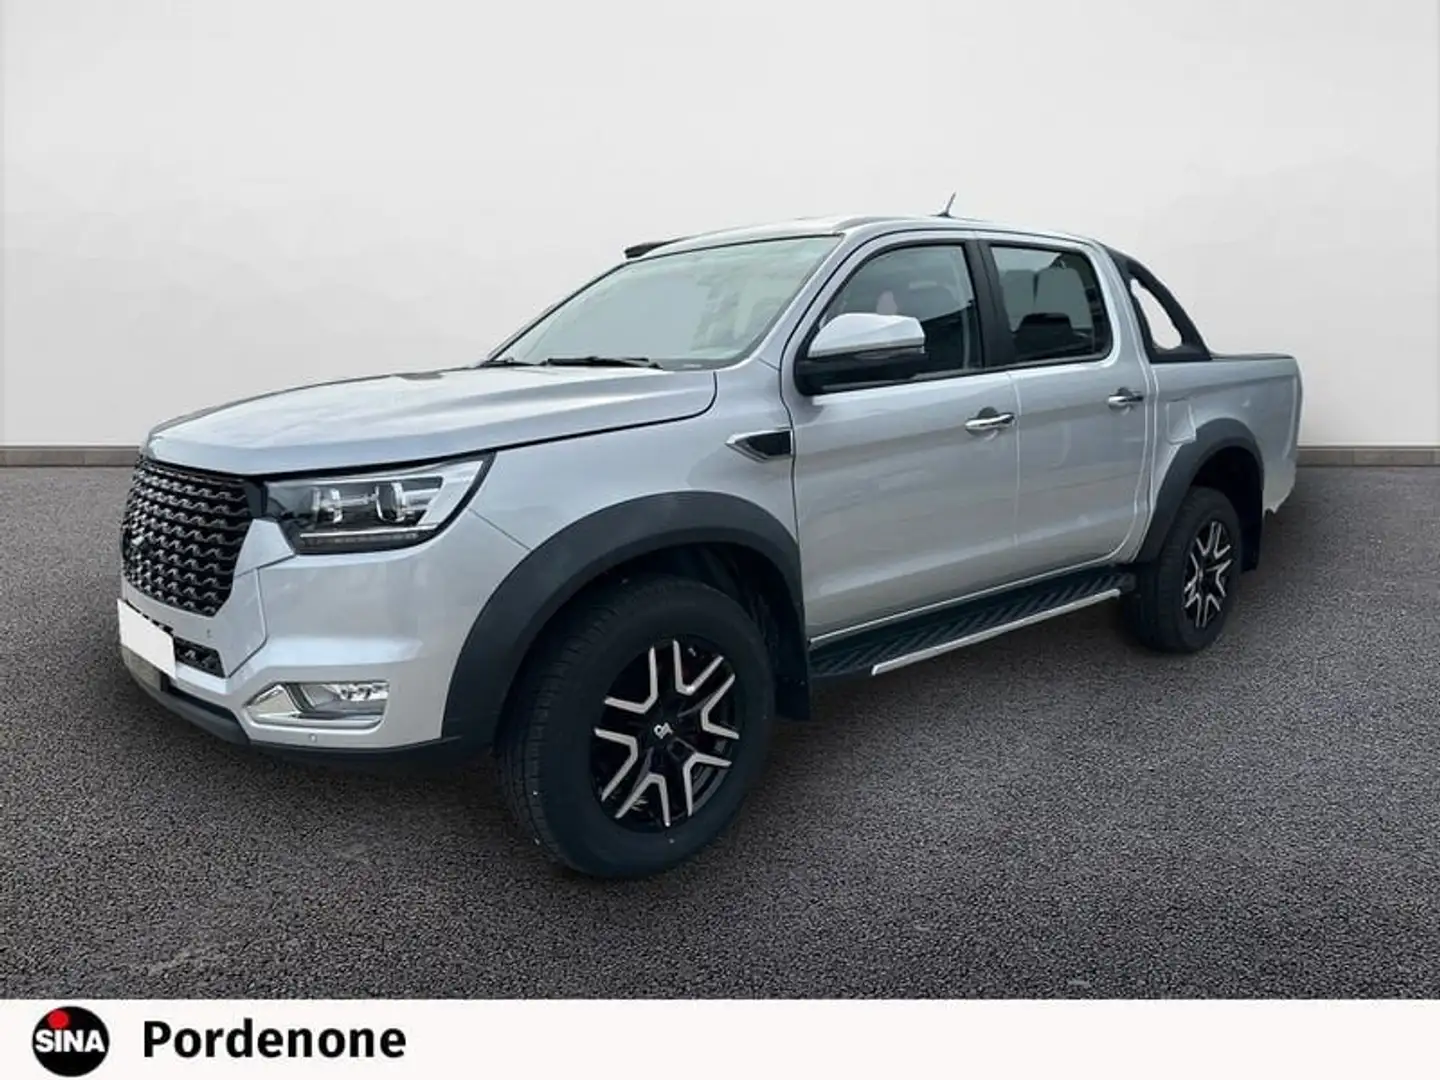 DR Automobiles PK8 2.0 Turbo Diesel Doppia Cabina 4x4 - COOL WUV - F Argent - 1